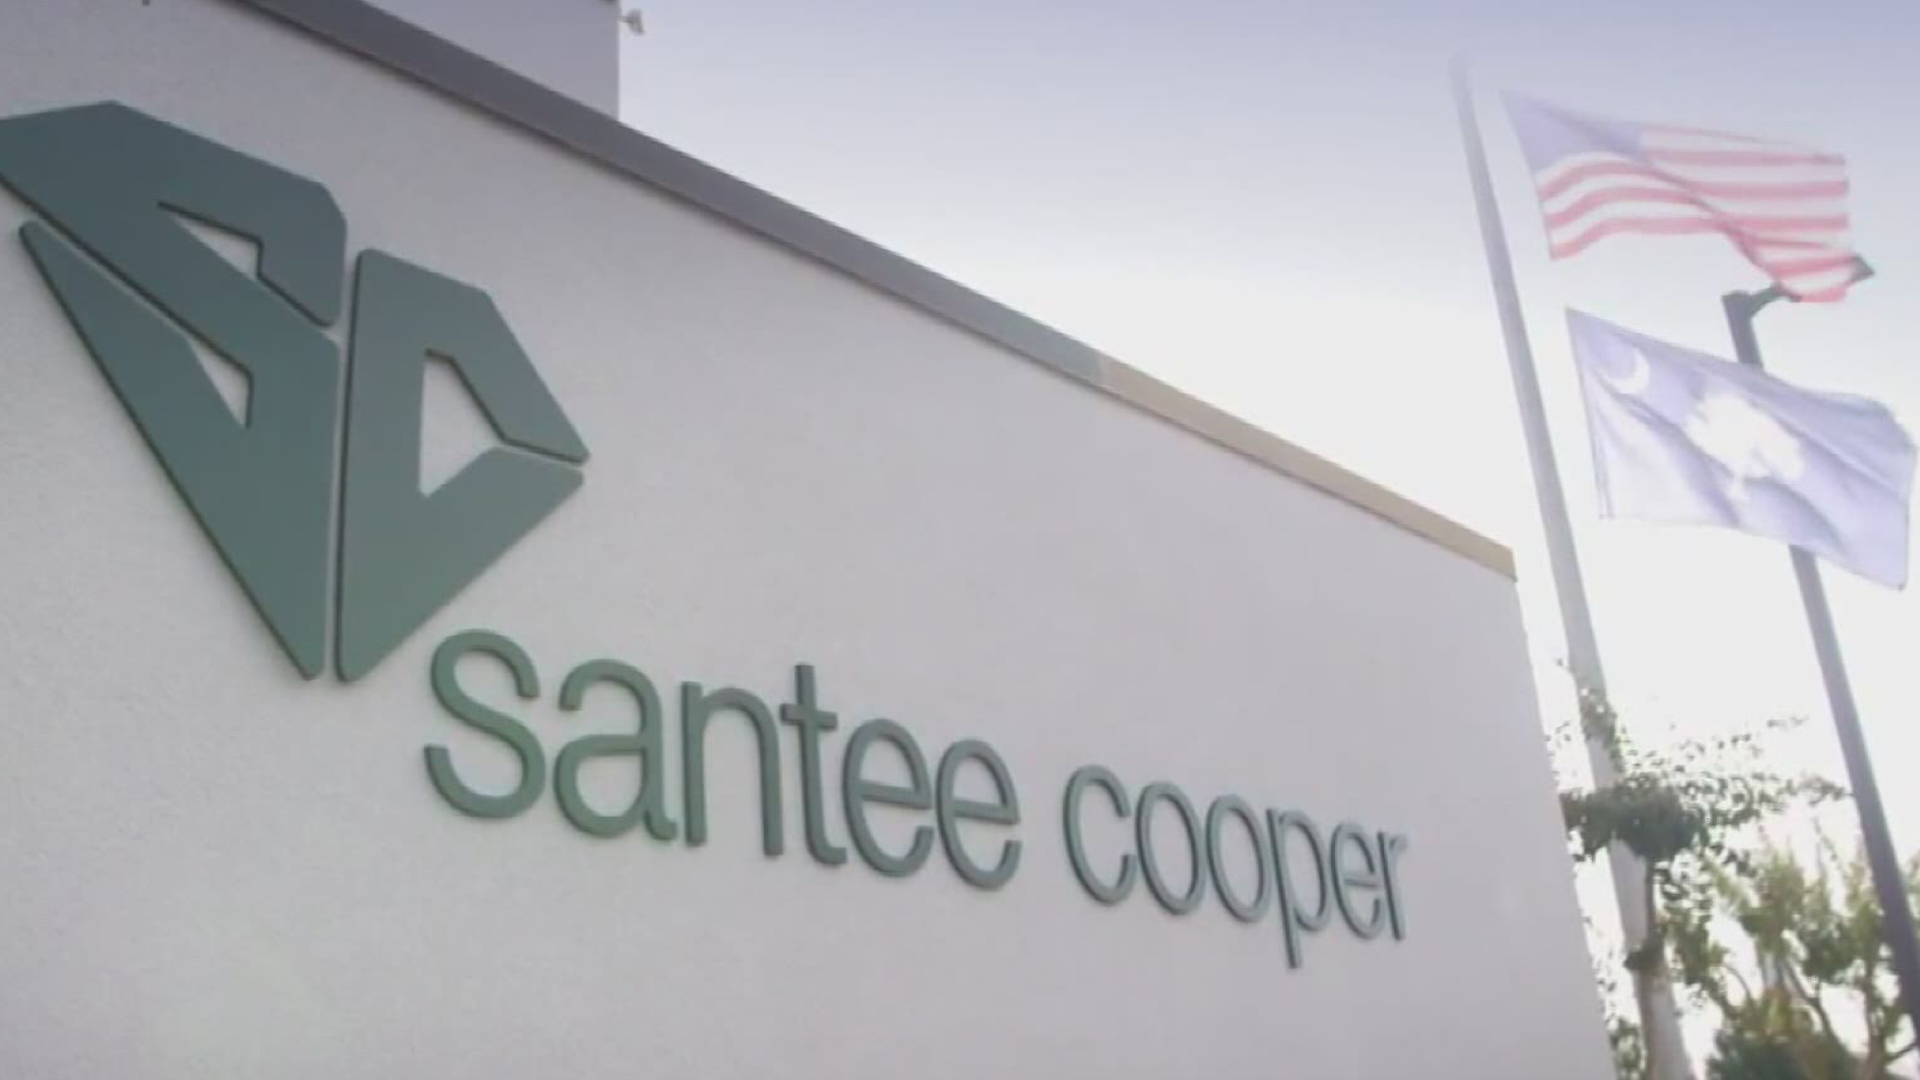 Current and former customers of Santee Cooper and the South Carolina Electric Cooperatives could receive a rebate as part of a settlement.